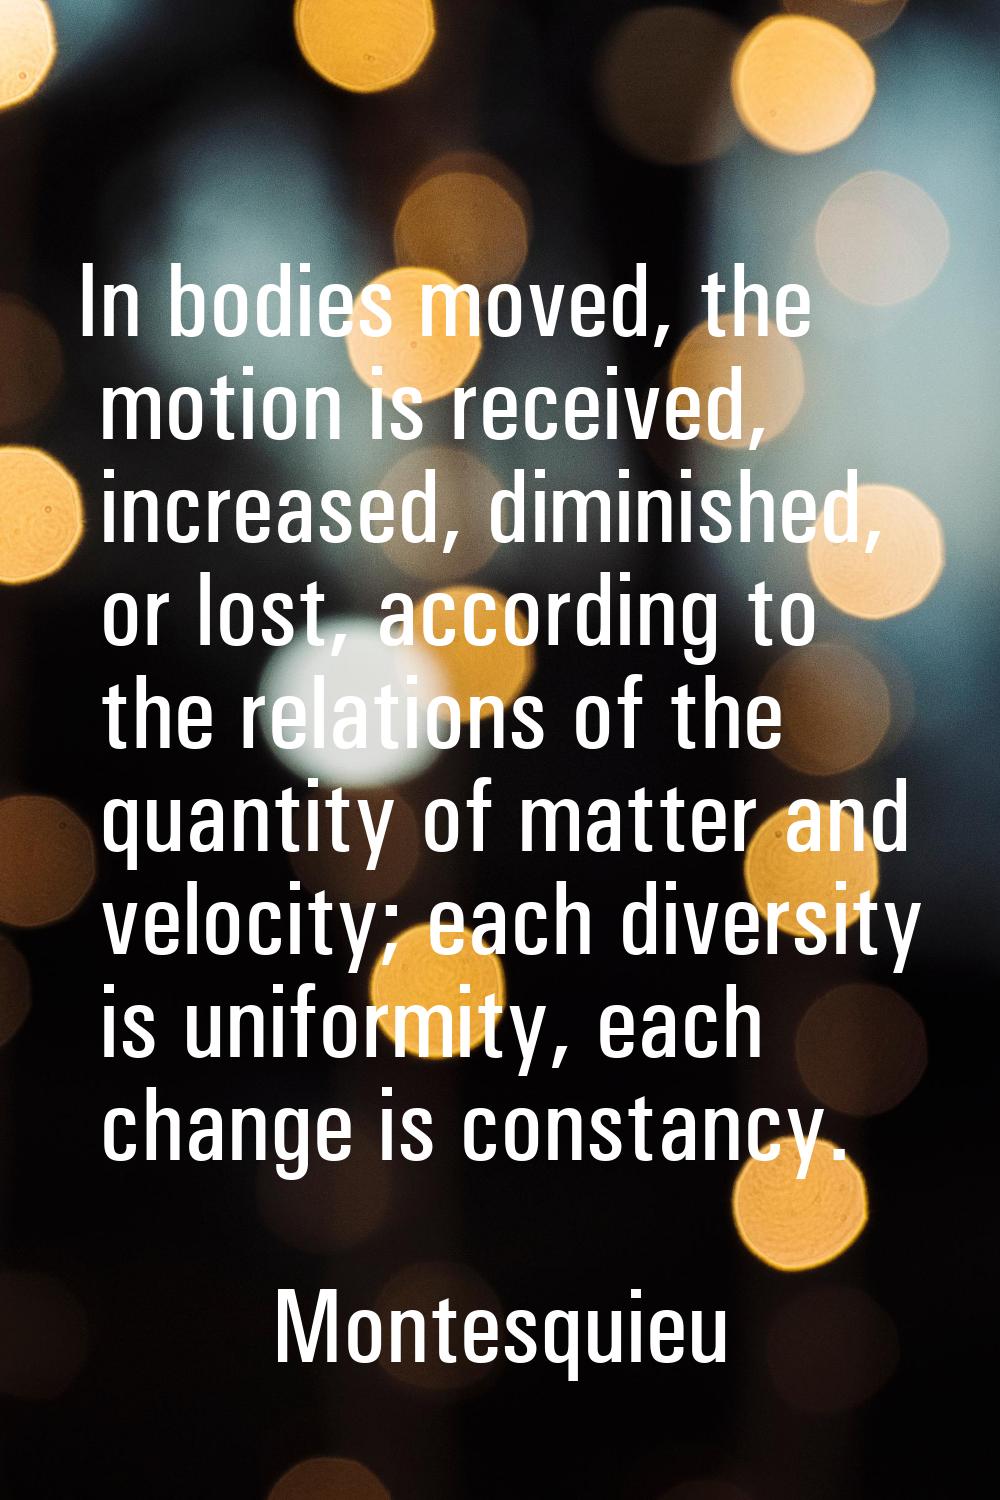 In bodies moved, the motion is received, increased, diminished, or lost, according to the relations